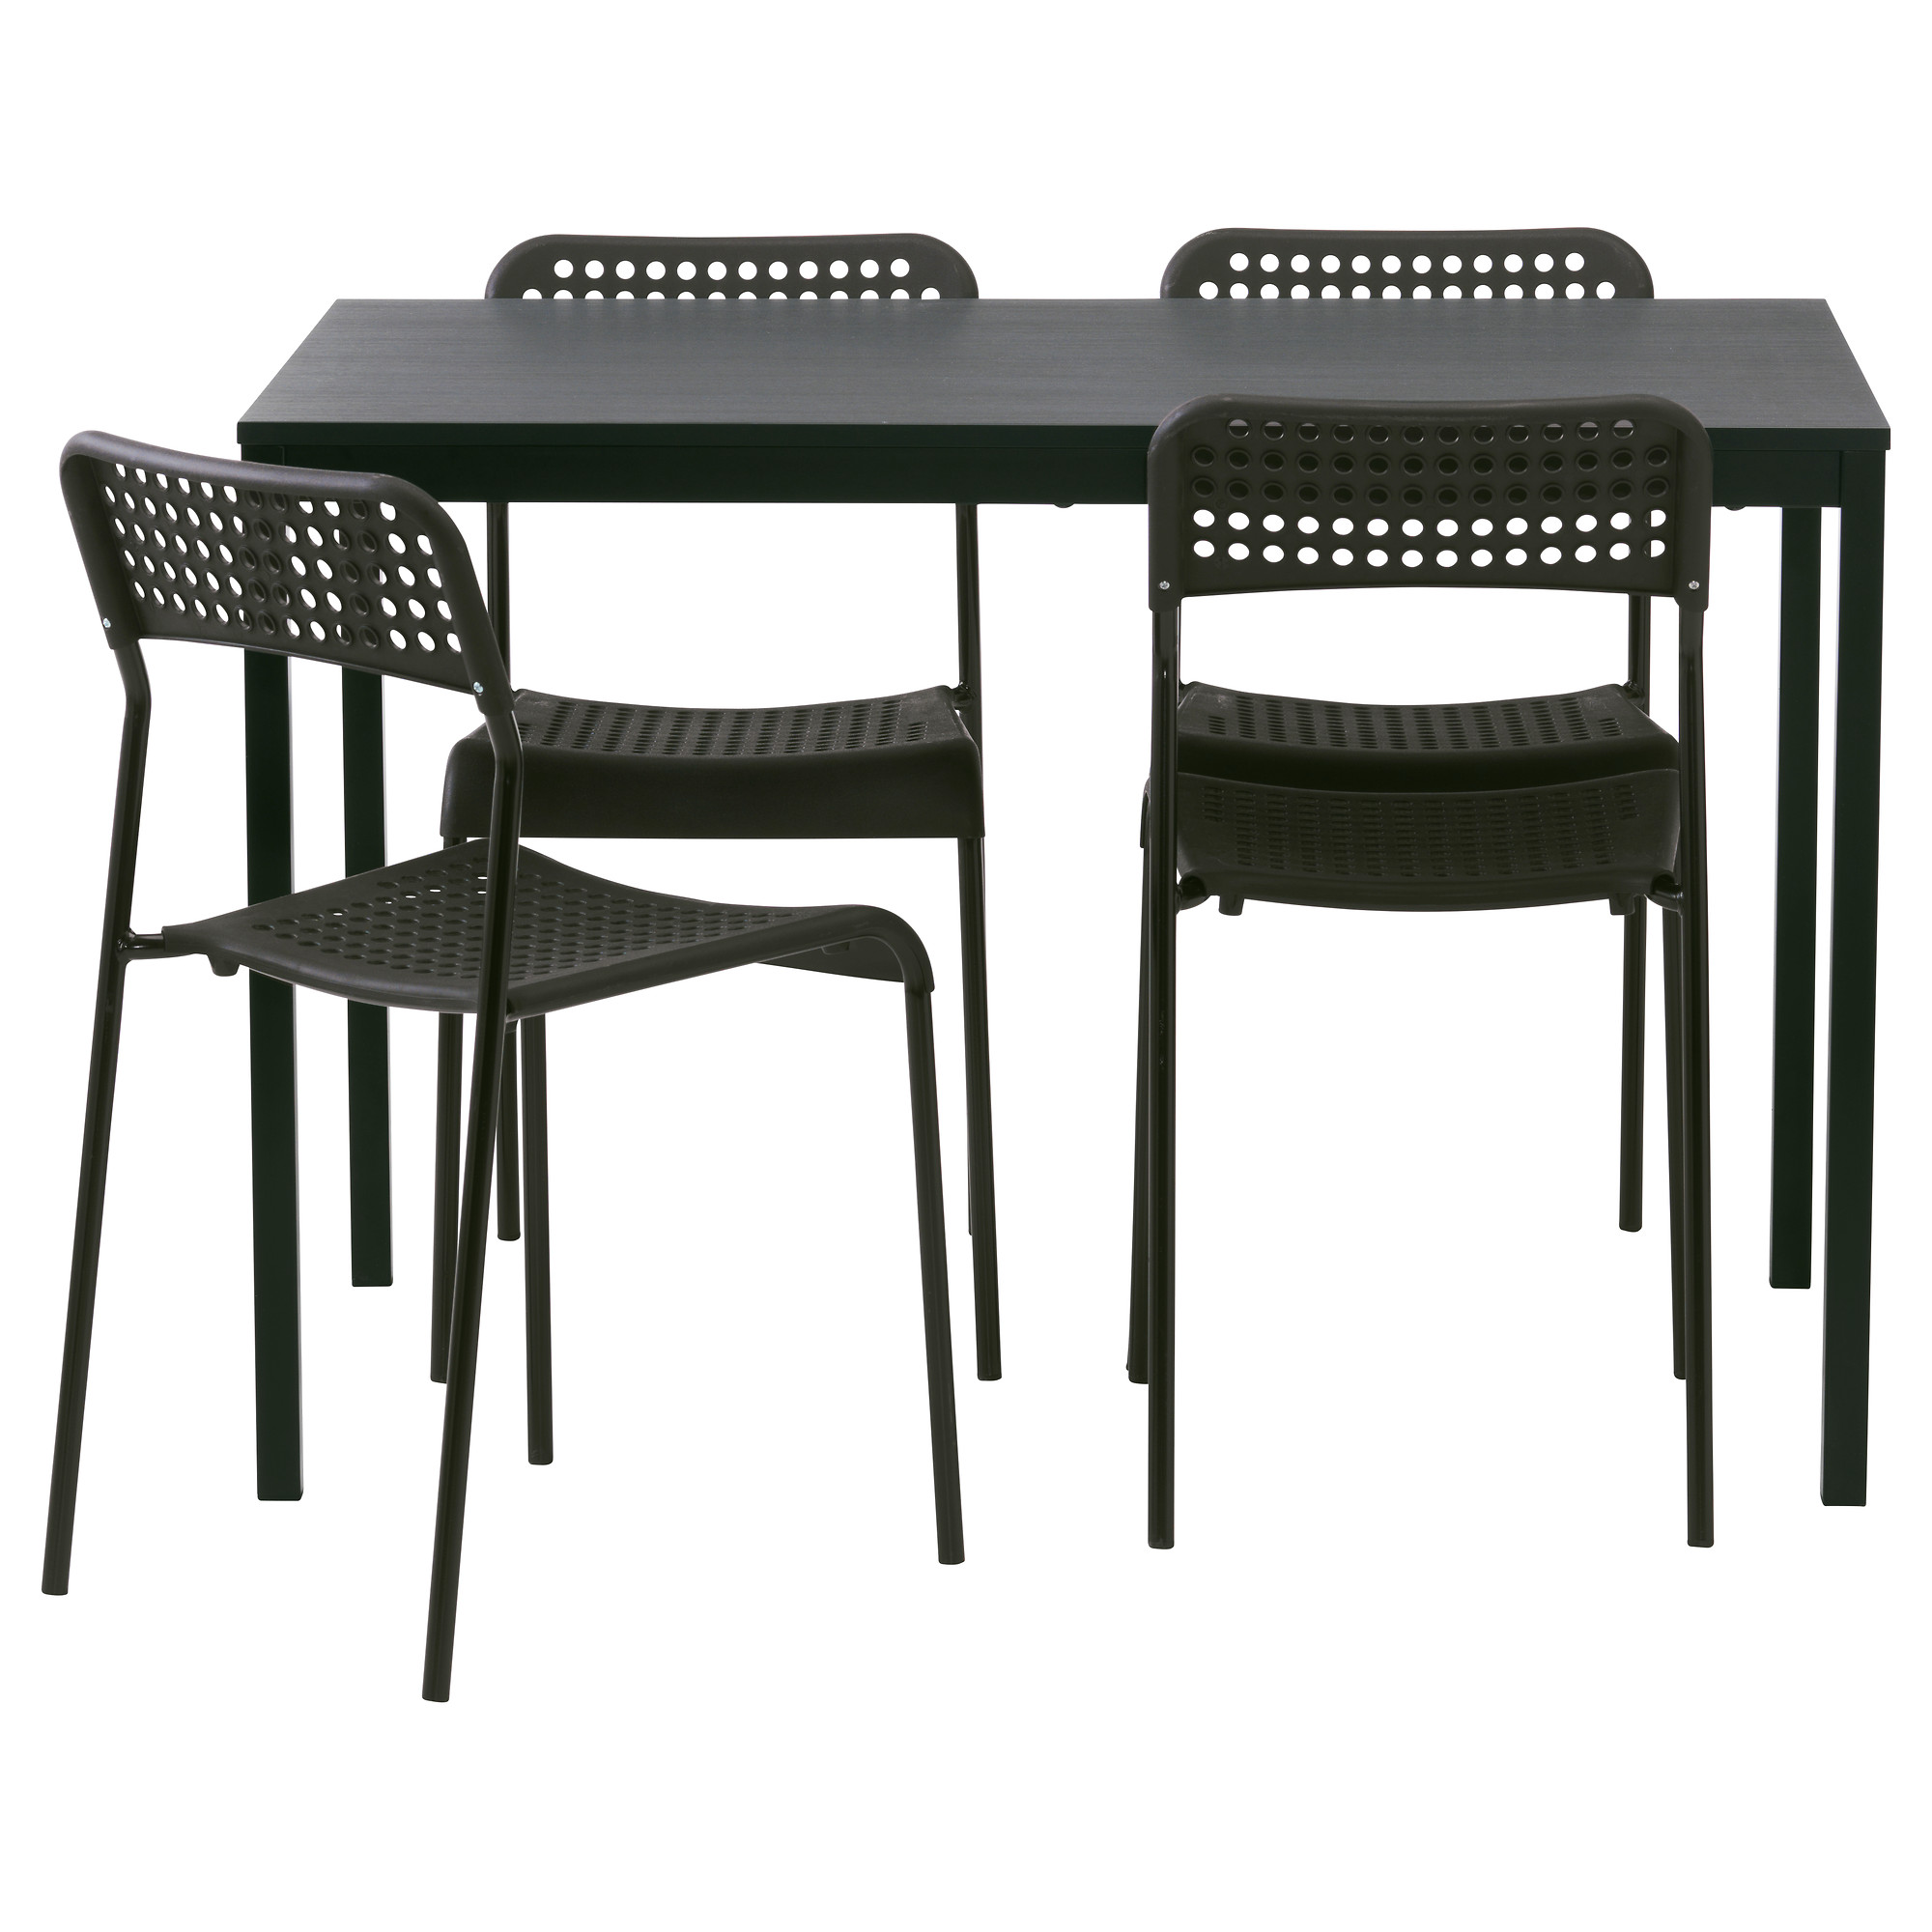  Ikea Canada Chairs Table for Large Space